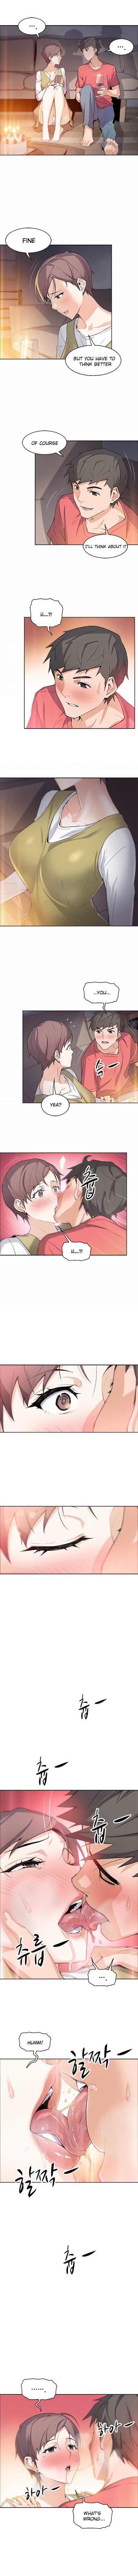 Camshow Housekeeper [Neck Pillow, Paper] Ch.49/49 [English] [Manhwa PDF] Completed Amature - Page 5